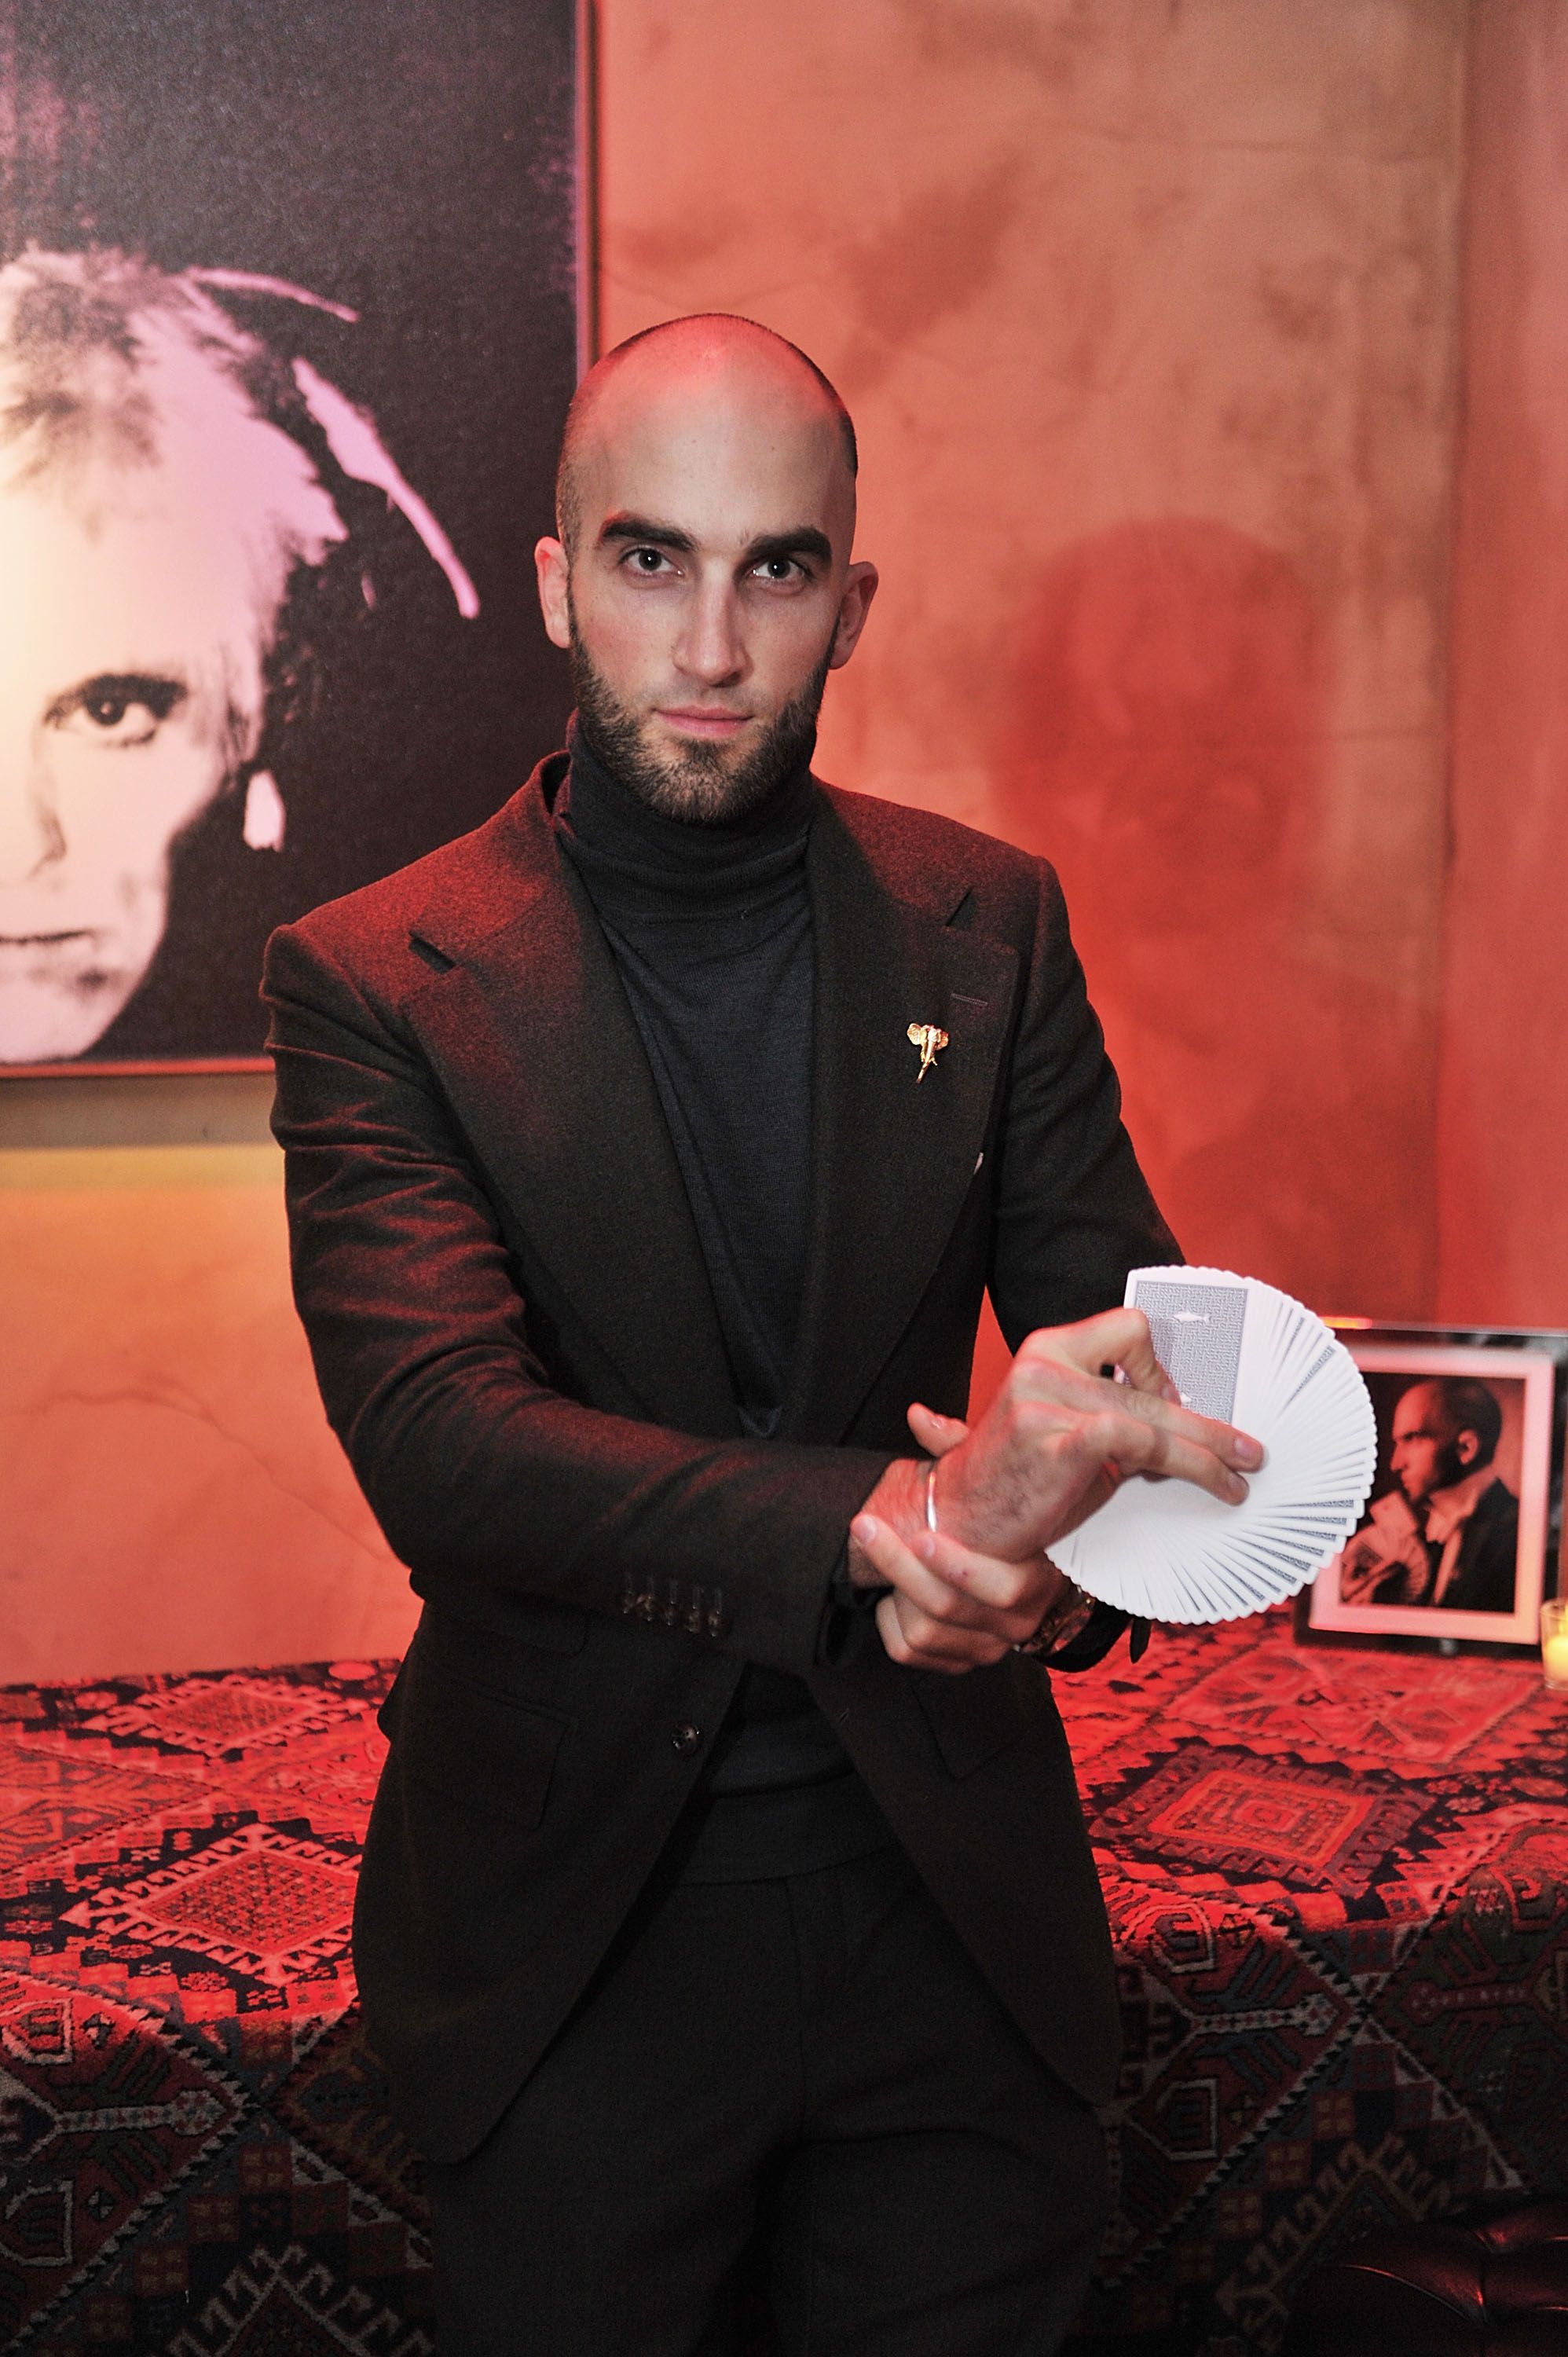 Drummond Money Coutts Drummond Money Coutts Magic Touches People In The Way He Was Born In